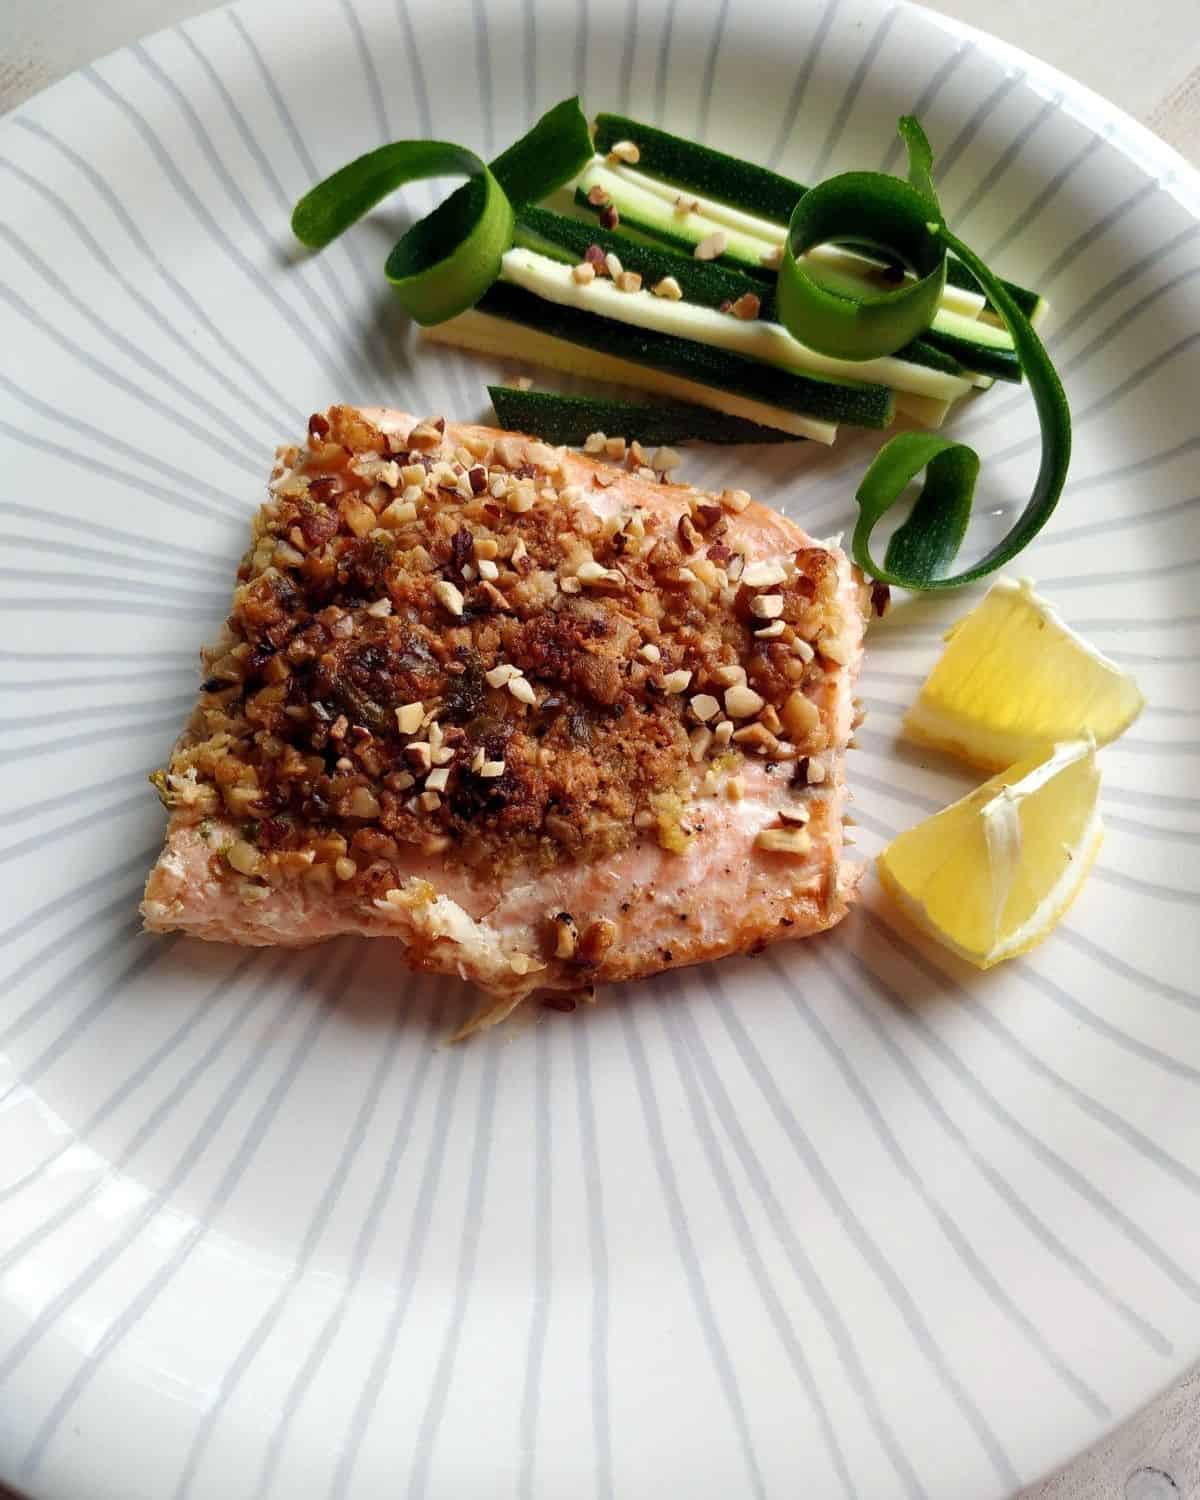 A view from above of Almonds Crusted Salmoni in a white dish showing the almond crust on top. It is served with sliced zucchini and lemon.